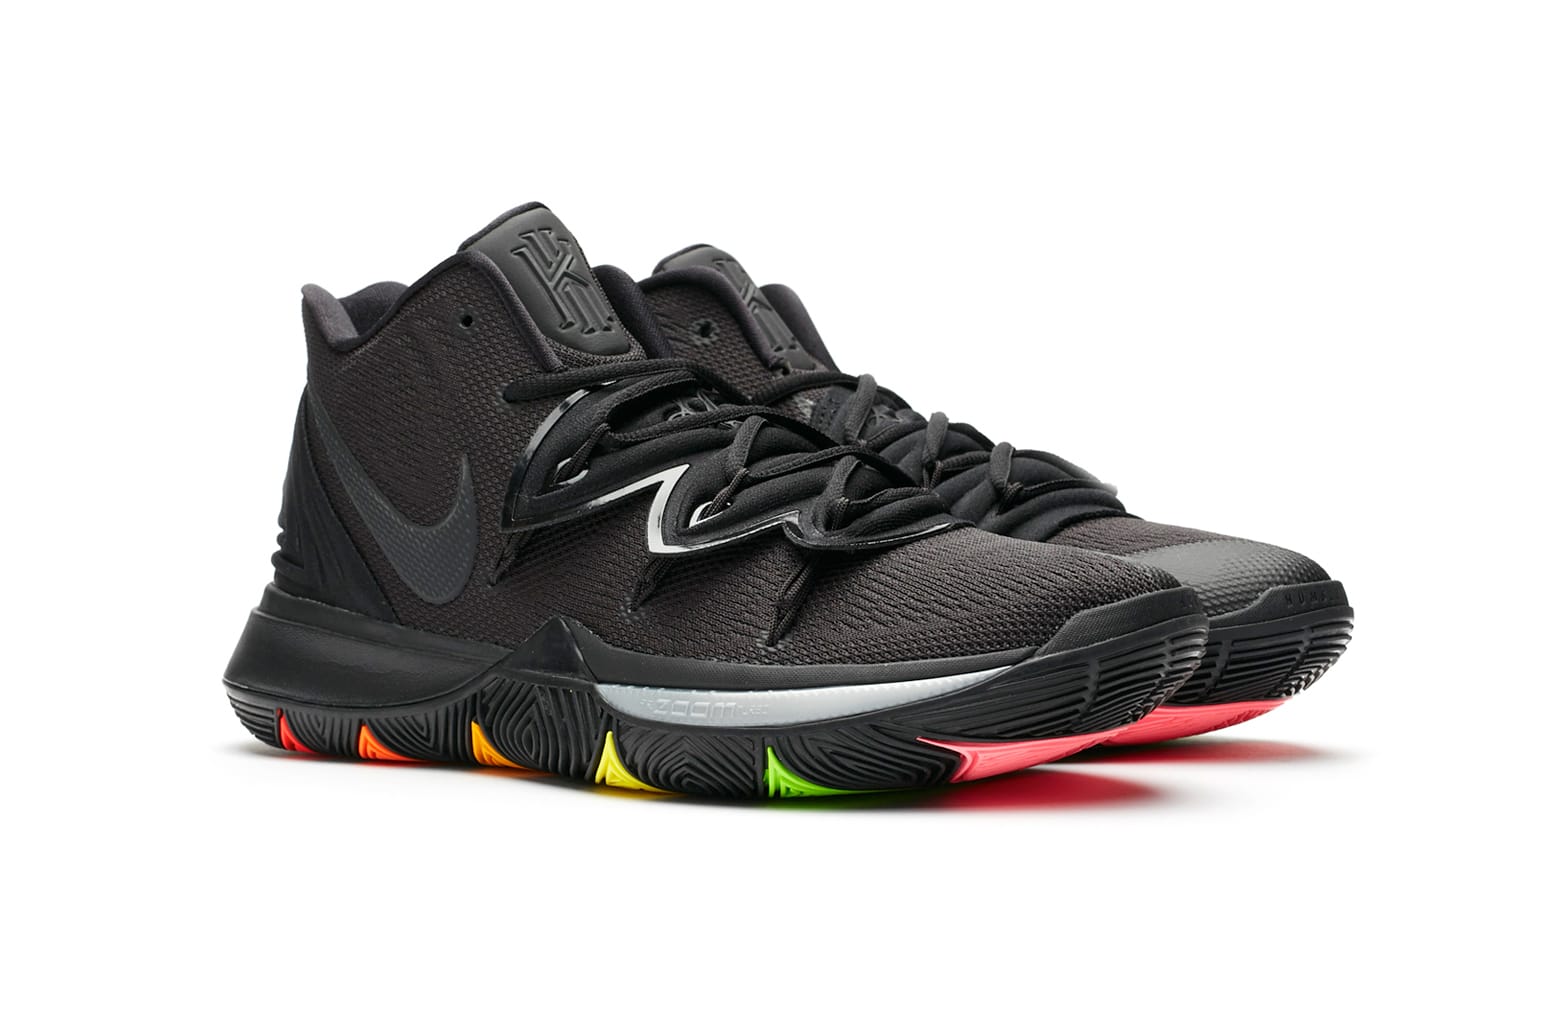 kyrie 5 black and red